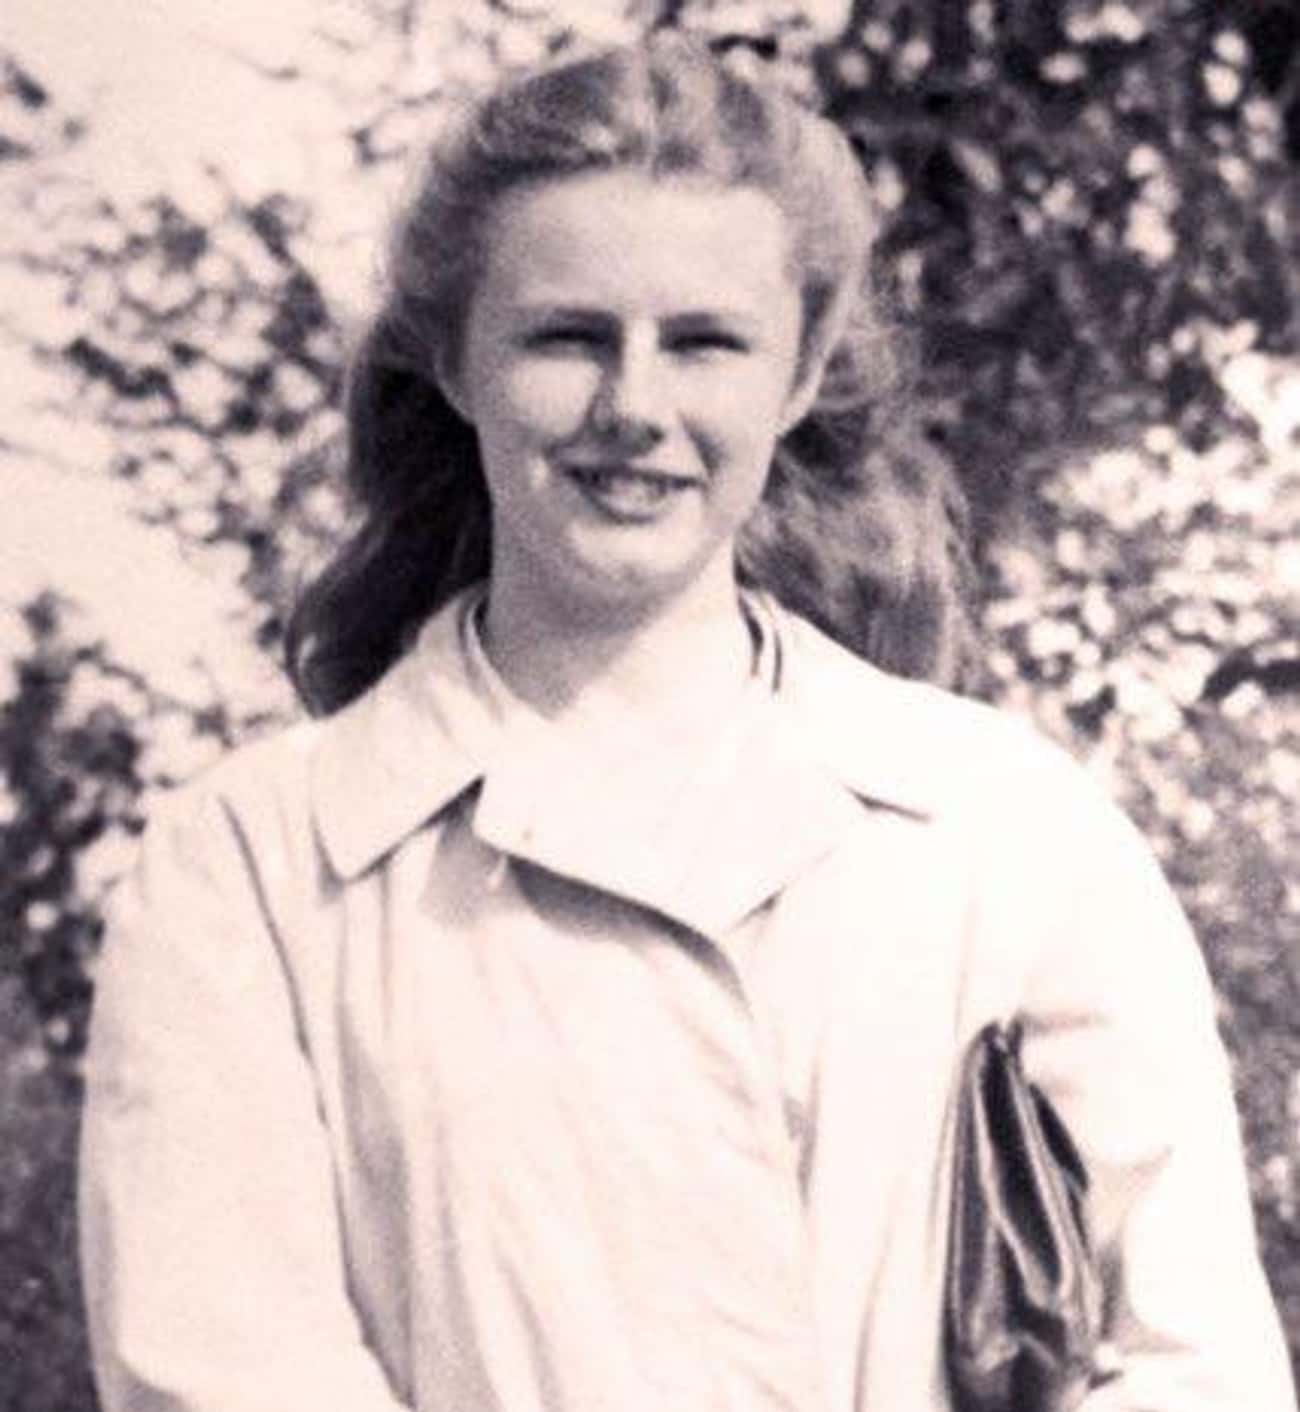 Welden Was Just 18 Years Old When She Went Missing On A Hike In December 1946